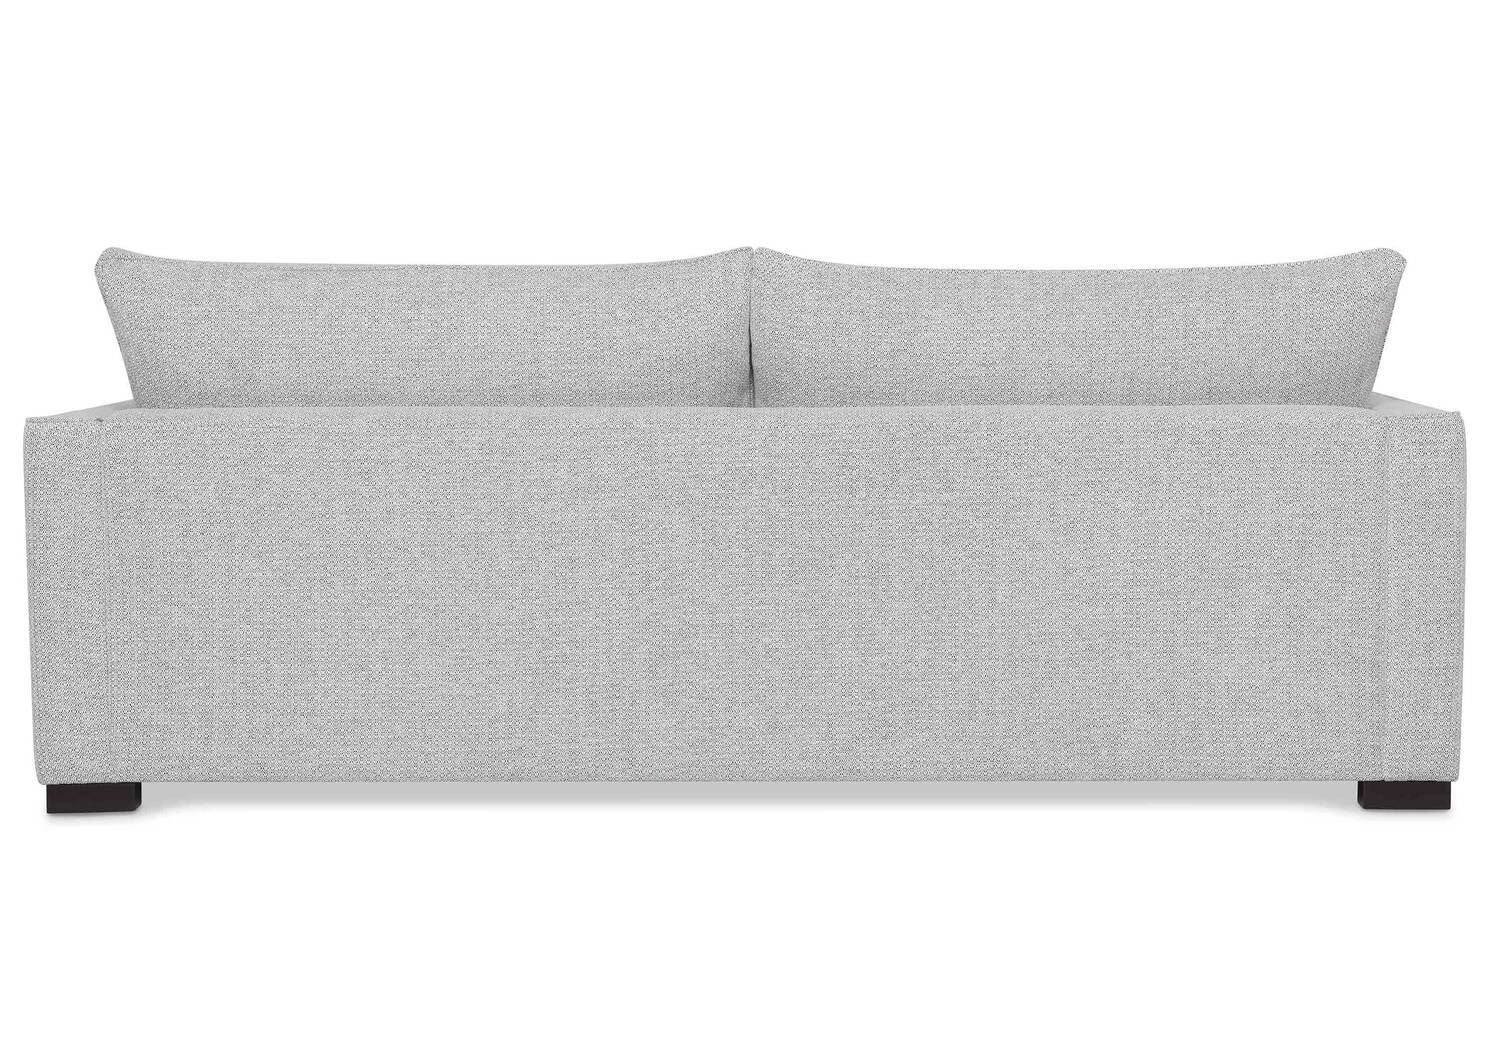 Sibley Sofa Chaise -Willow Static